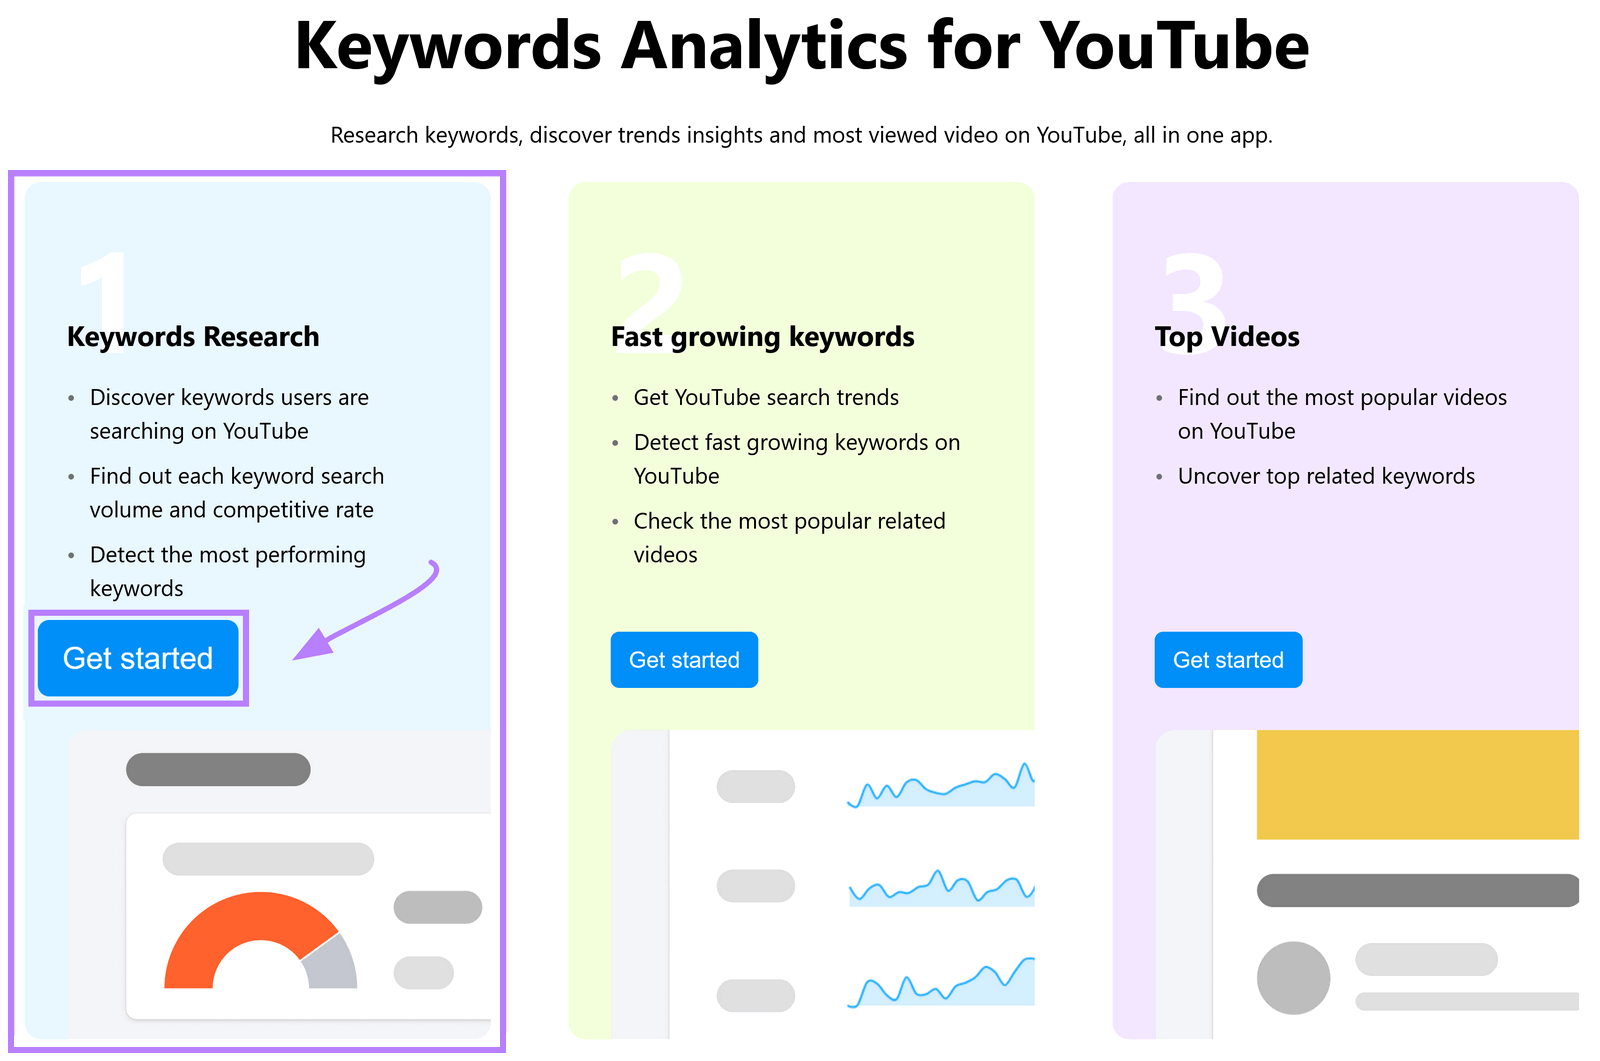 Get started with "Keyword Research" in Keyword Analytics for YouTube tool